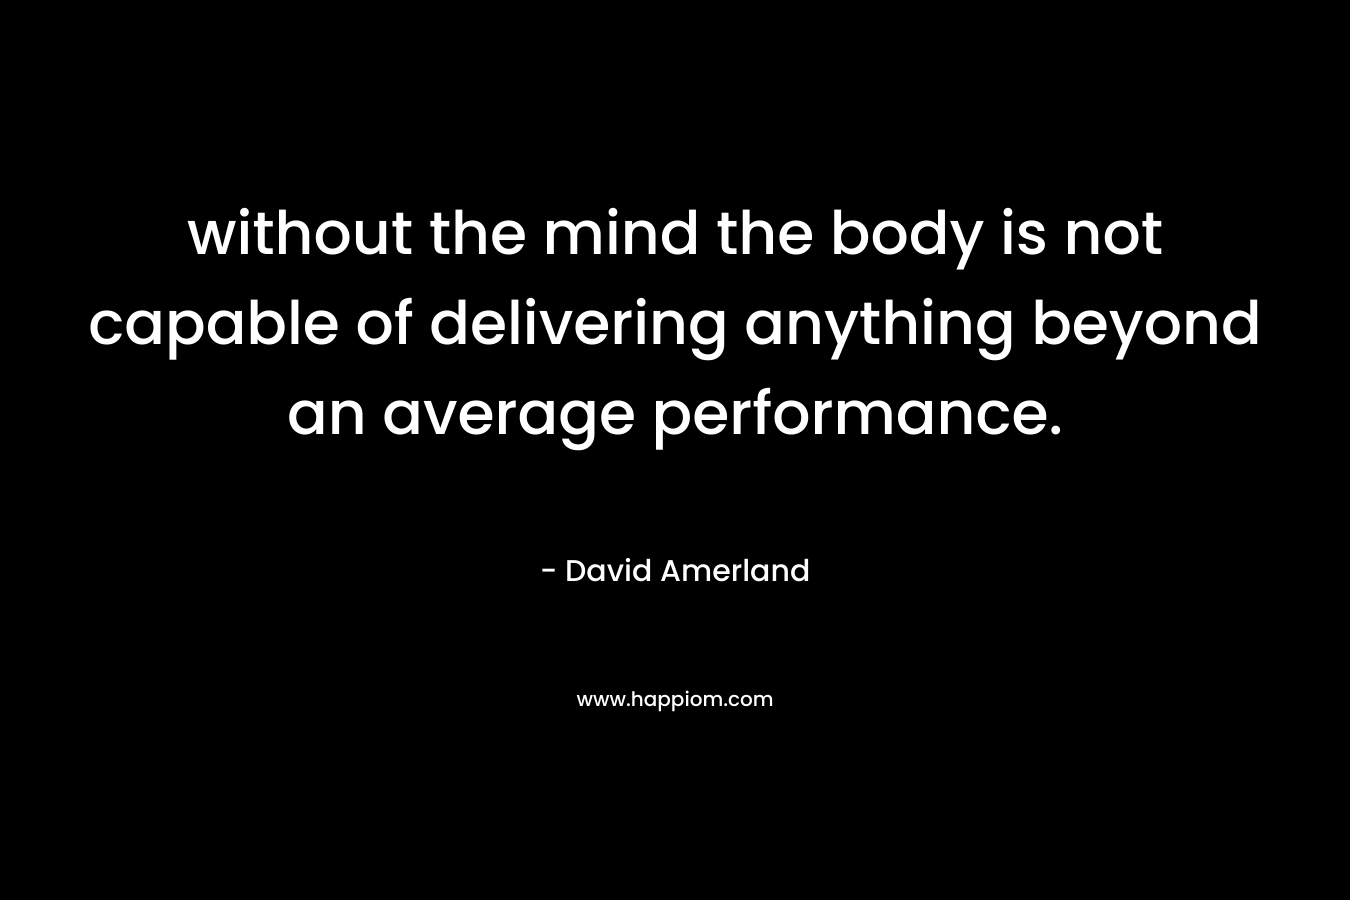 without the mind the body is not capable of delivering anything beyond an average performance. – David Amerland